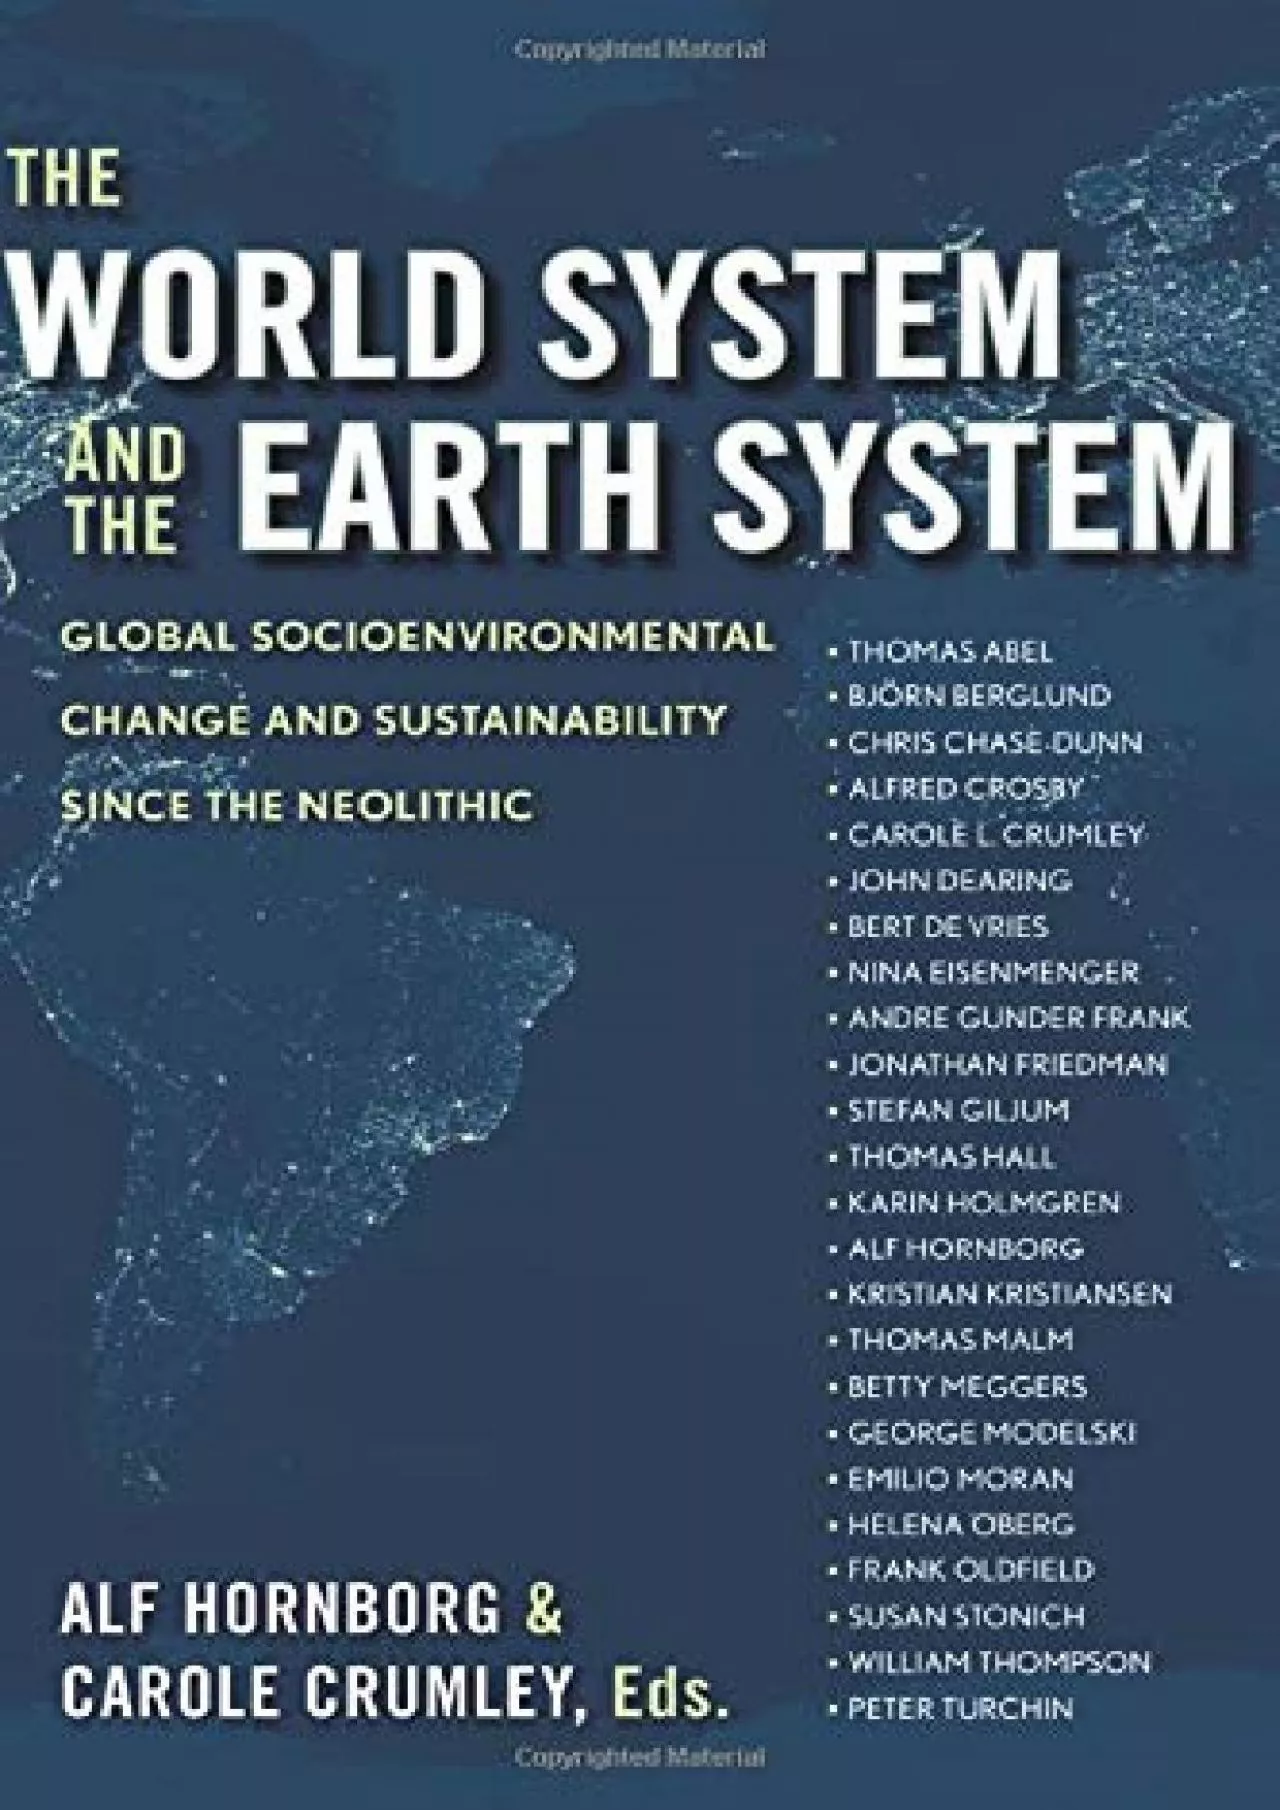 (DOWNLOAD)-The World System and the Earth System: Global Socioenvironmental Change and